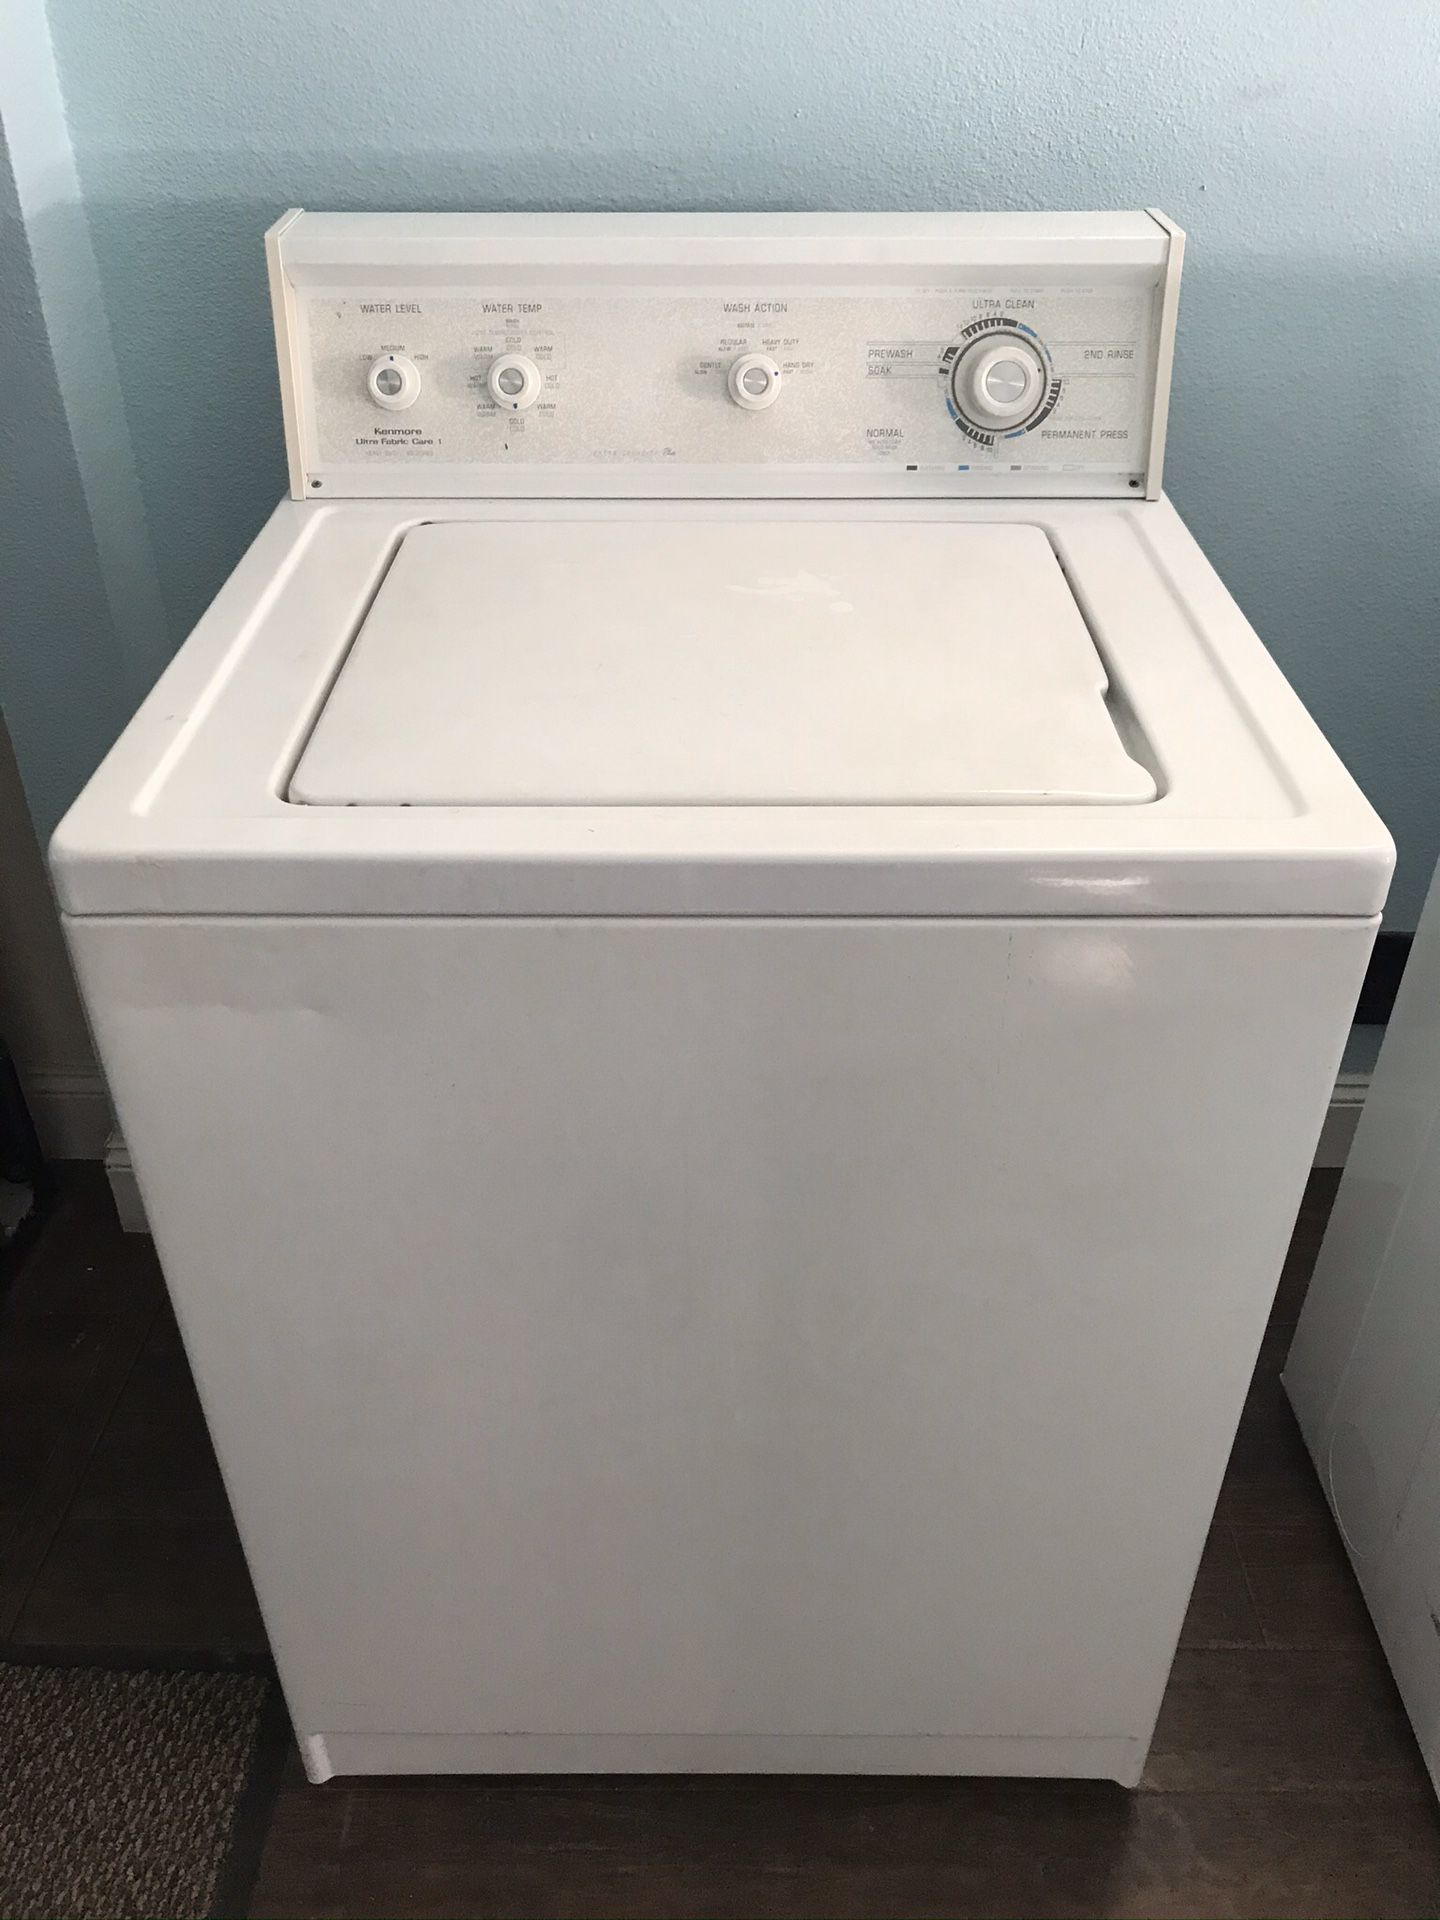 Washer By Kenmore